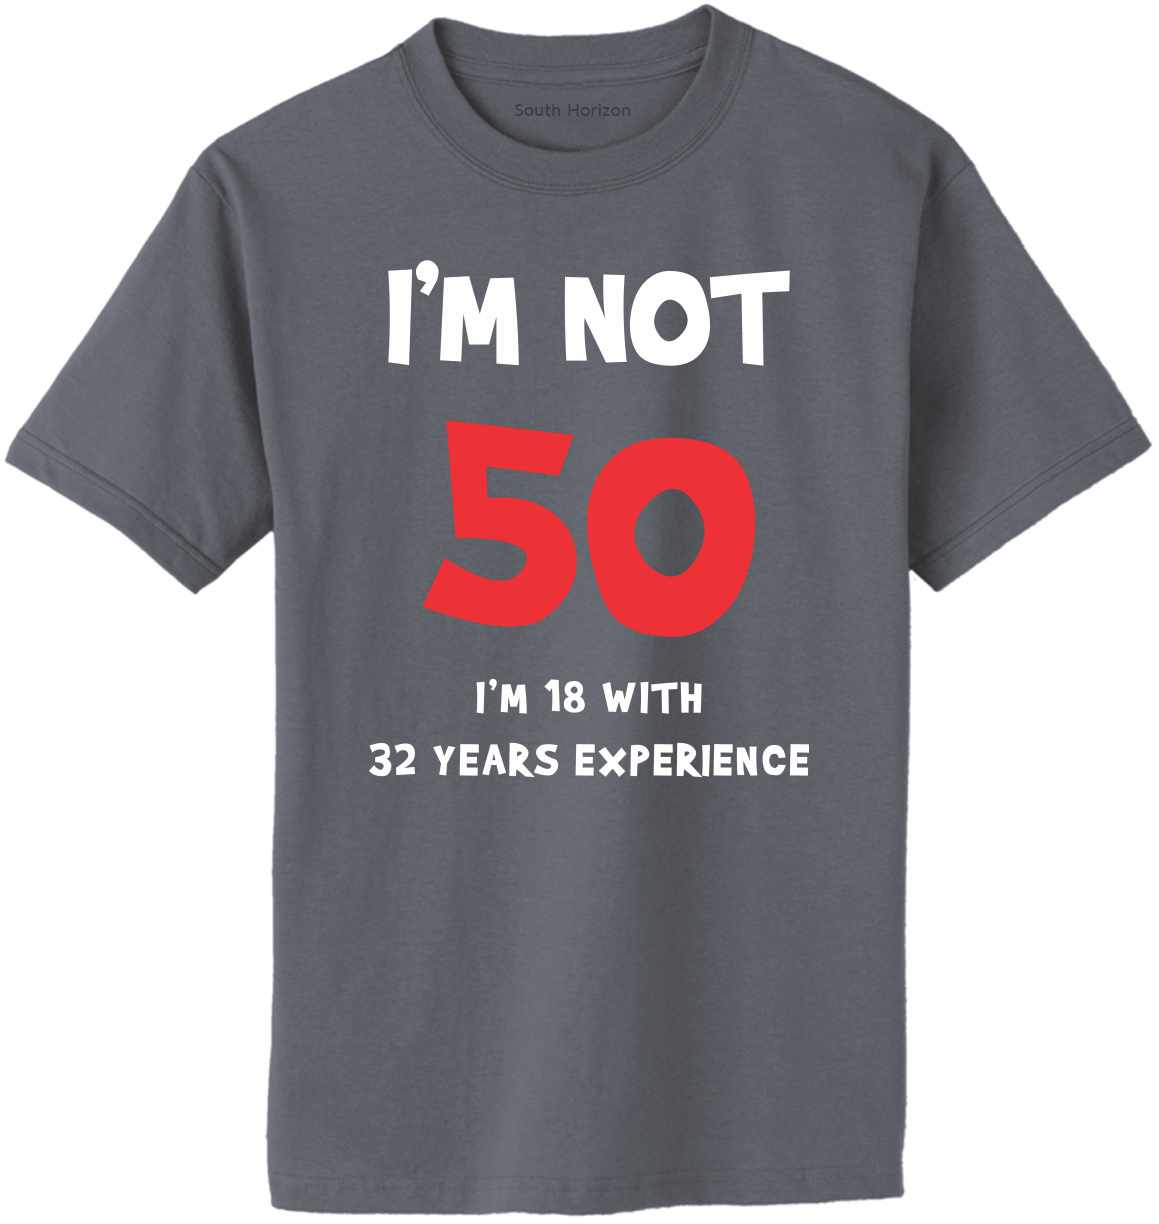 I AM NOT FIFTY Adult T-Shirt (#214-1)